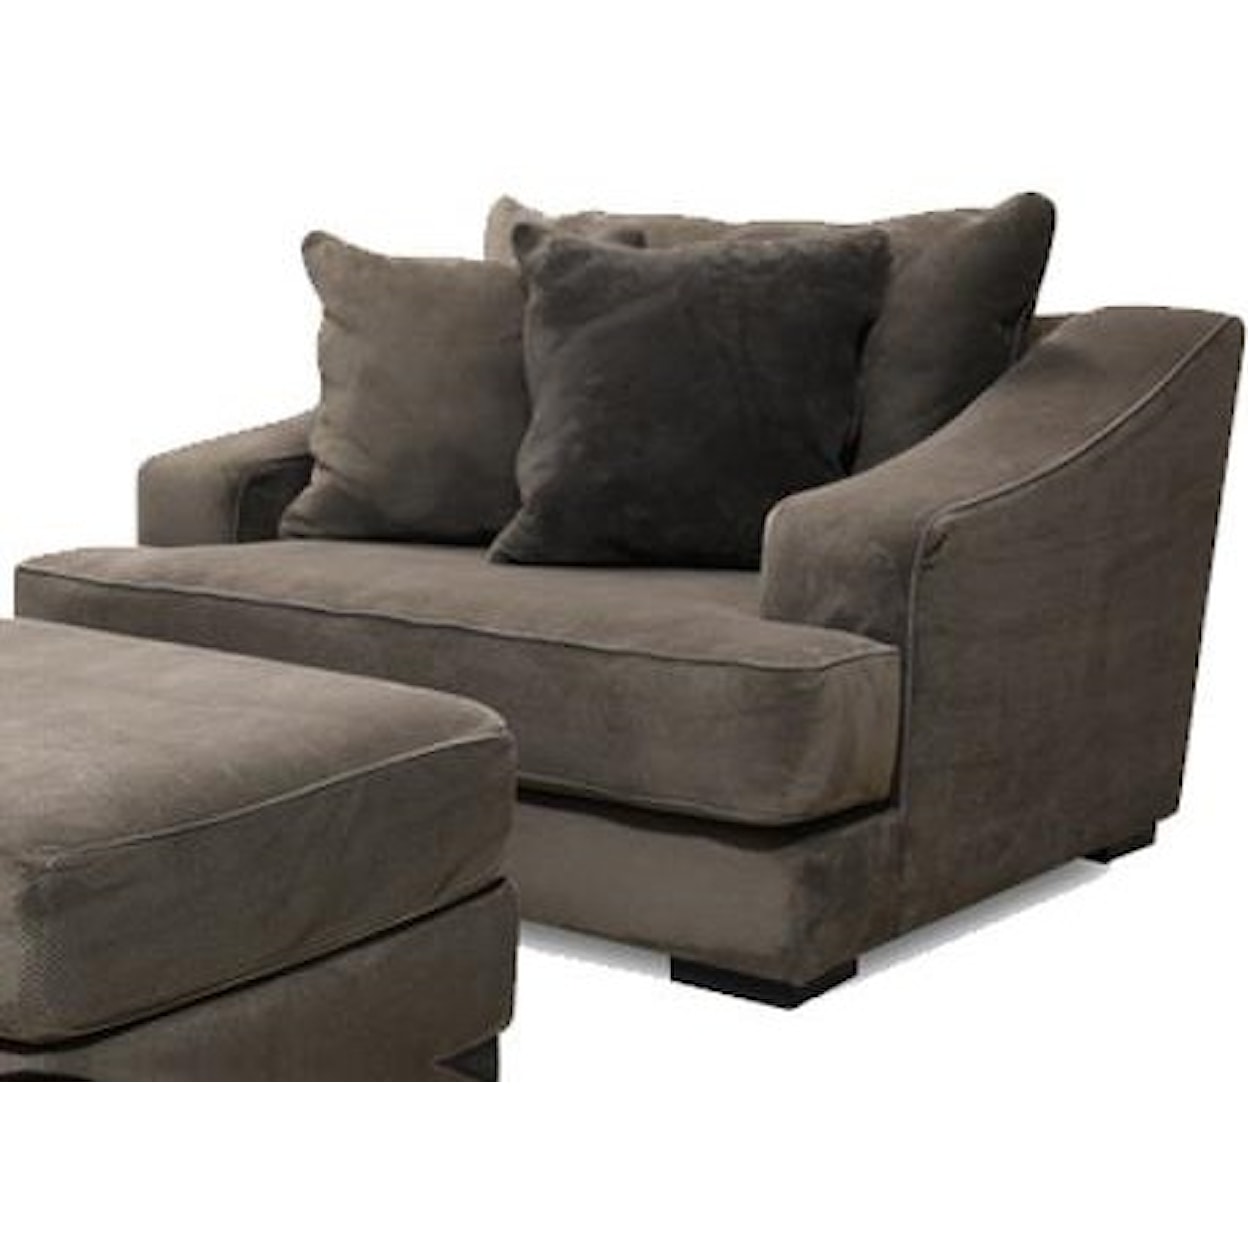 Sofamaster Brentwood Oversized Chair